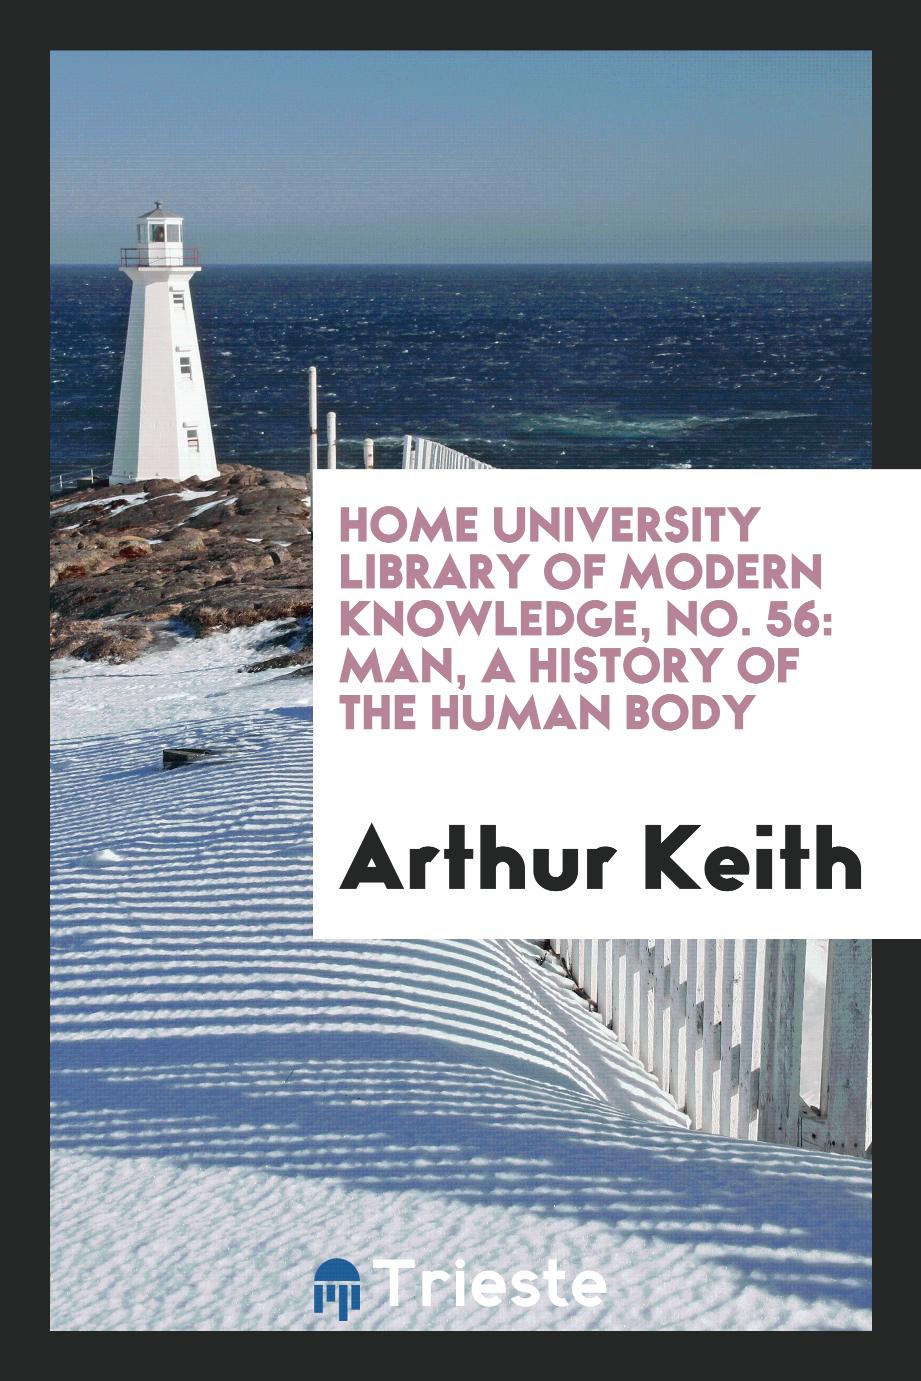 Home university library of modern knowledge, No. 56: Man, a history of the human body